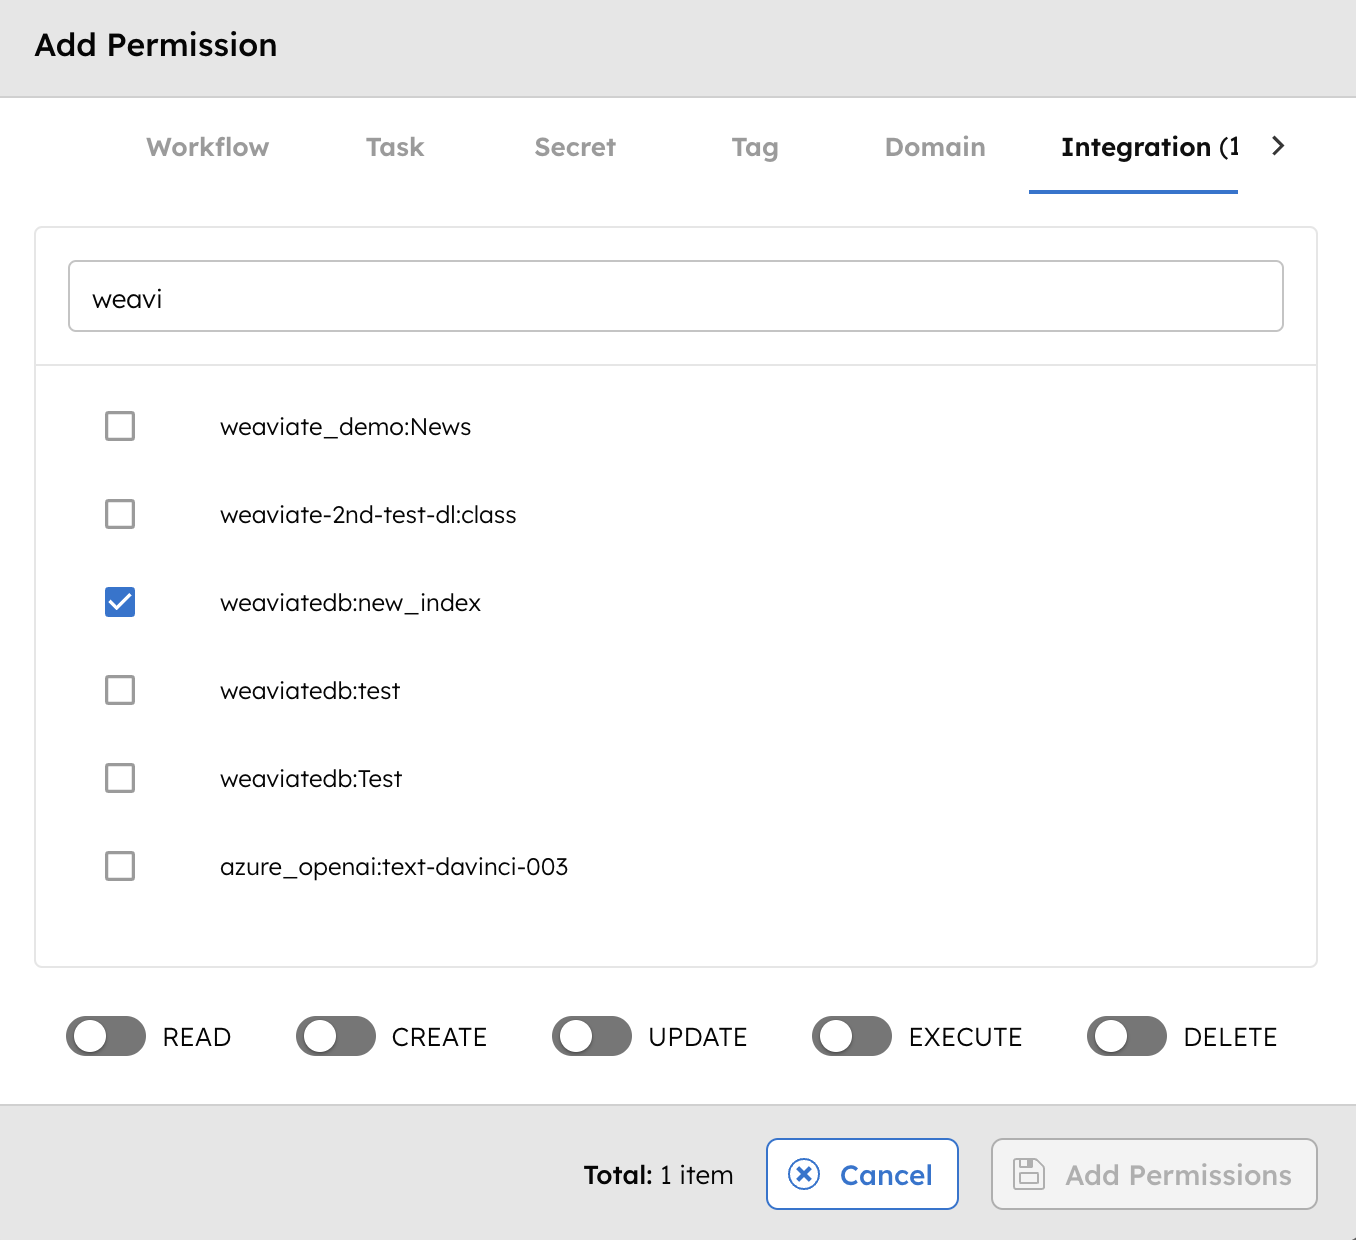 Add Permissions for Weaviate Database Integration